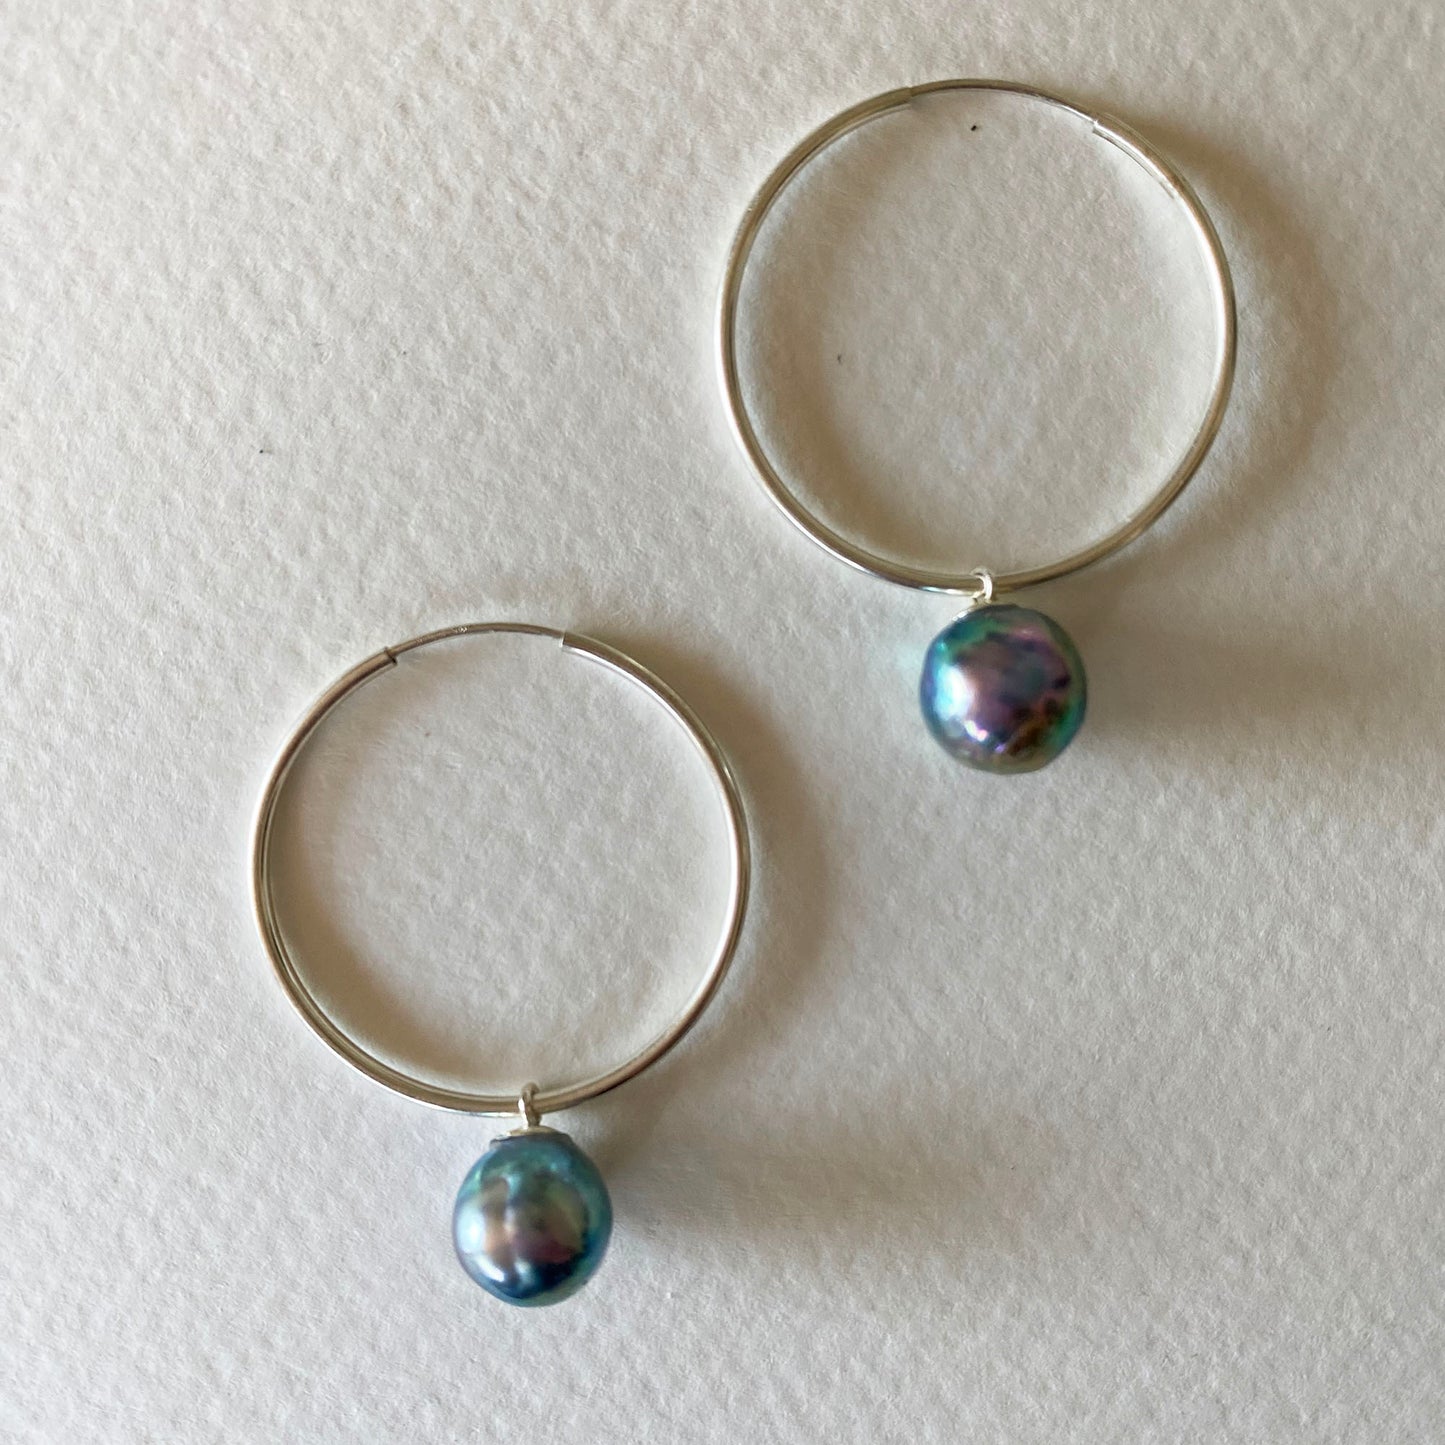 Blue Akoya Pearls on Sterling Silver Hoops #1 by Linda Queally